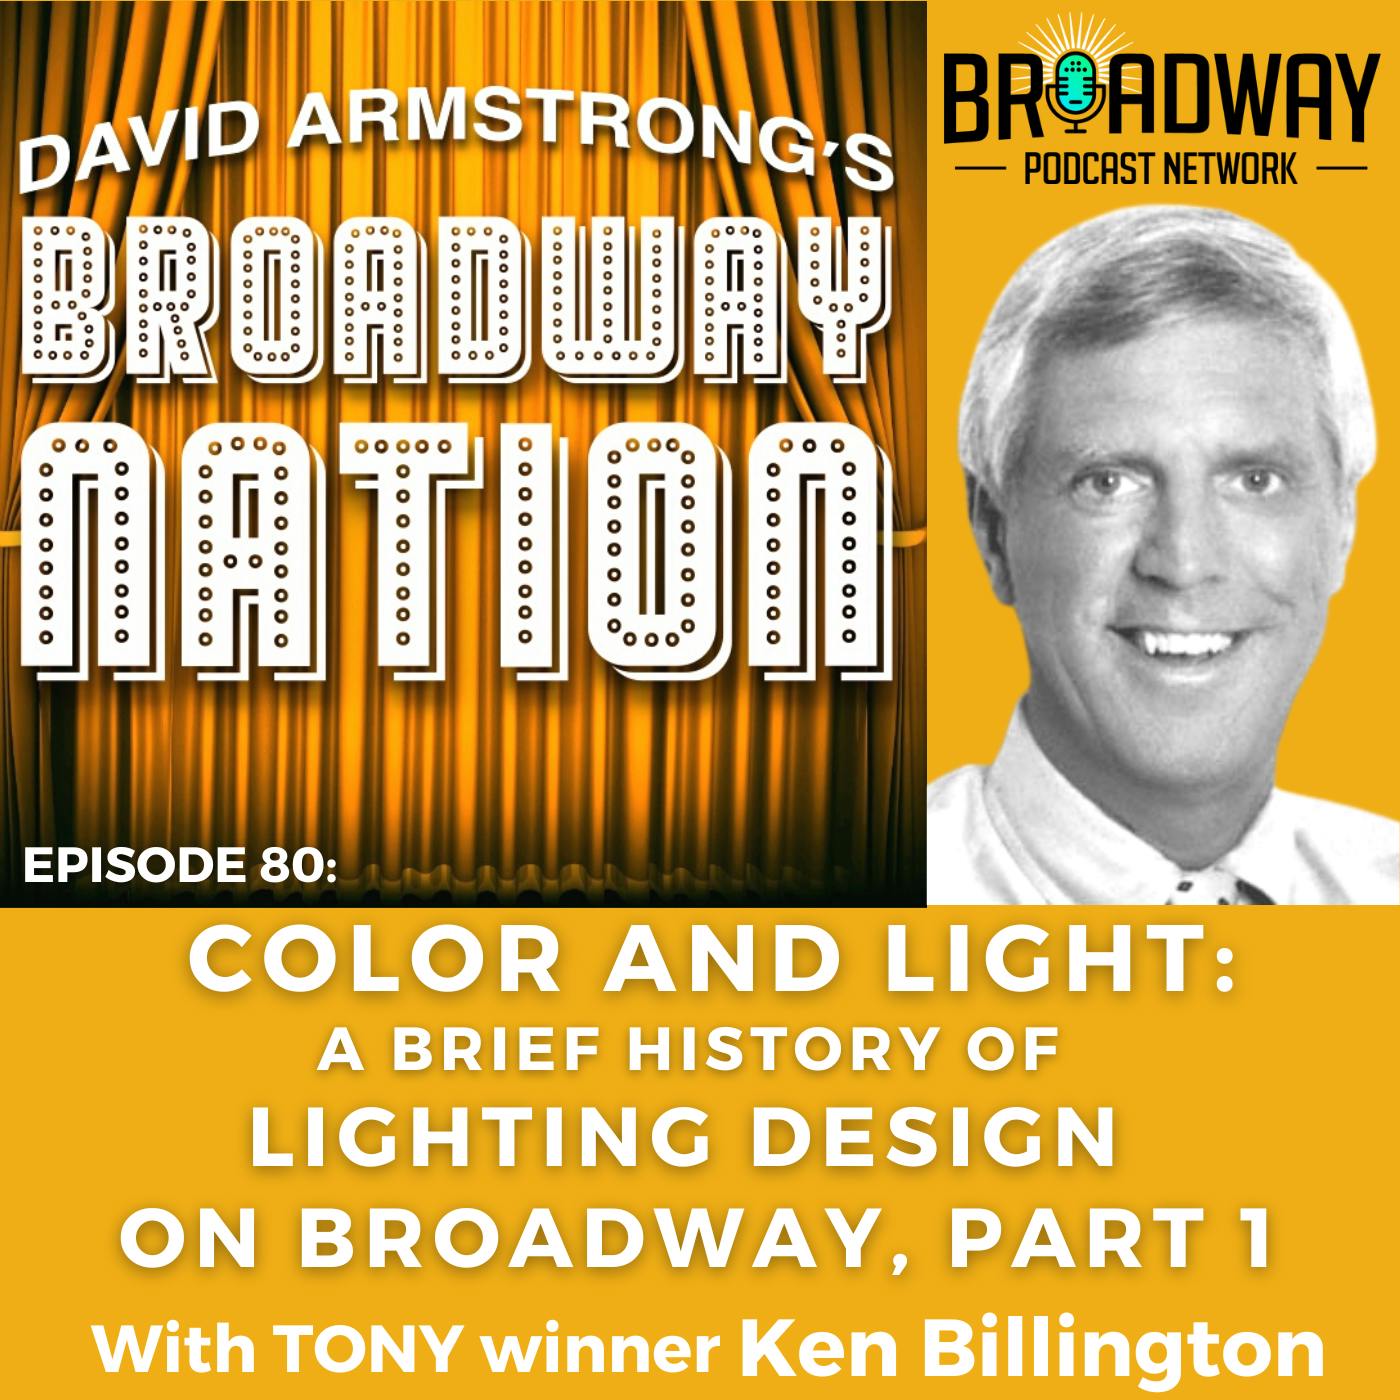 Episode 80: COLOR AND LIGHT: A Brief History of Broadway Lighting Design